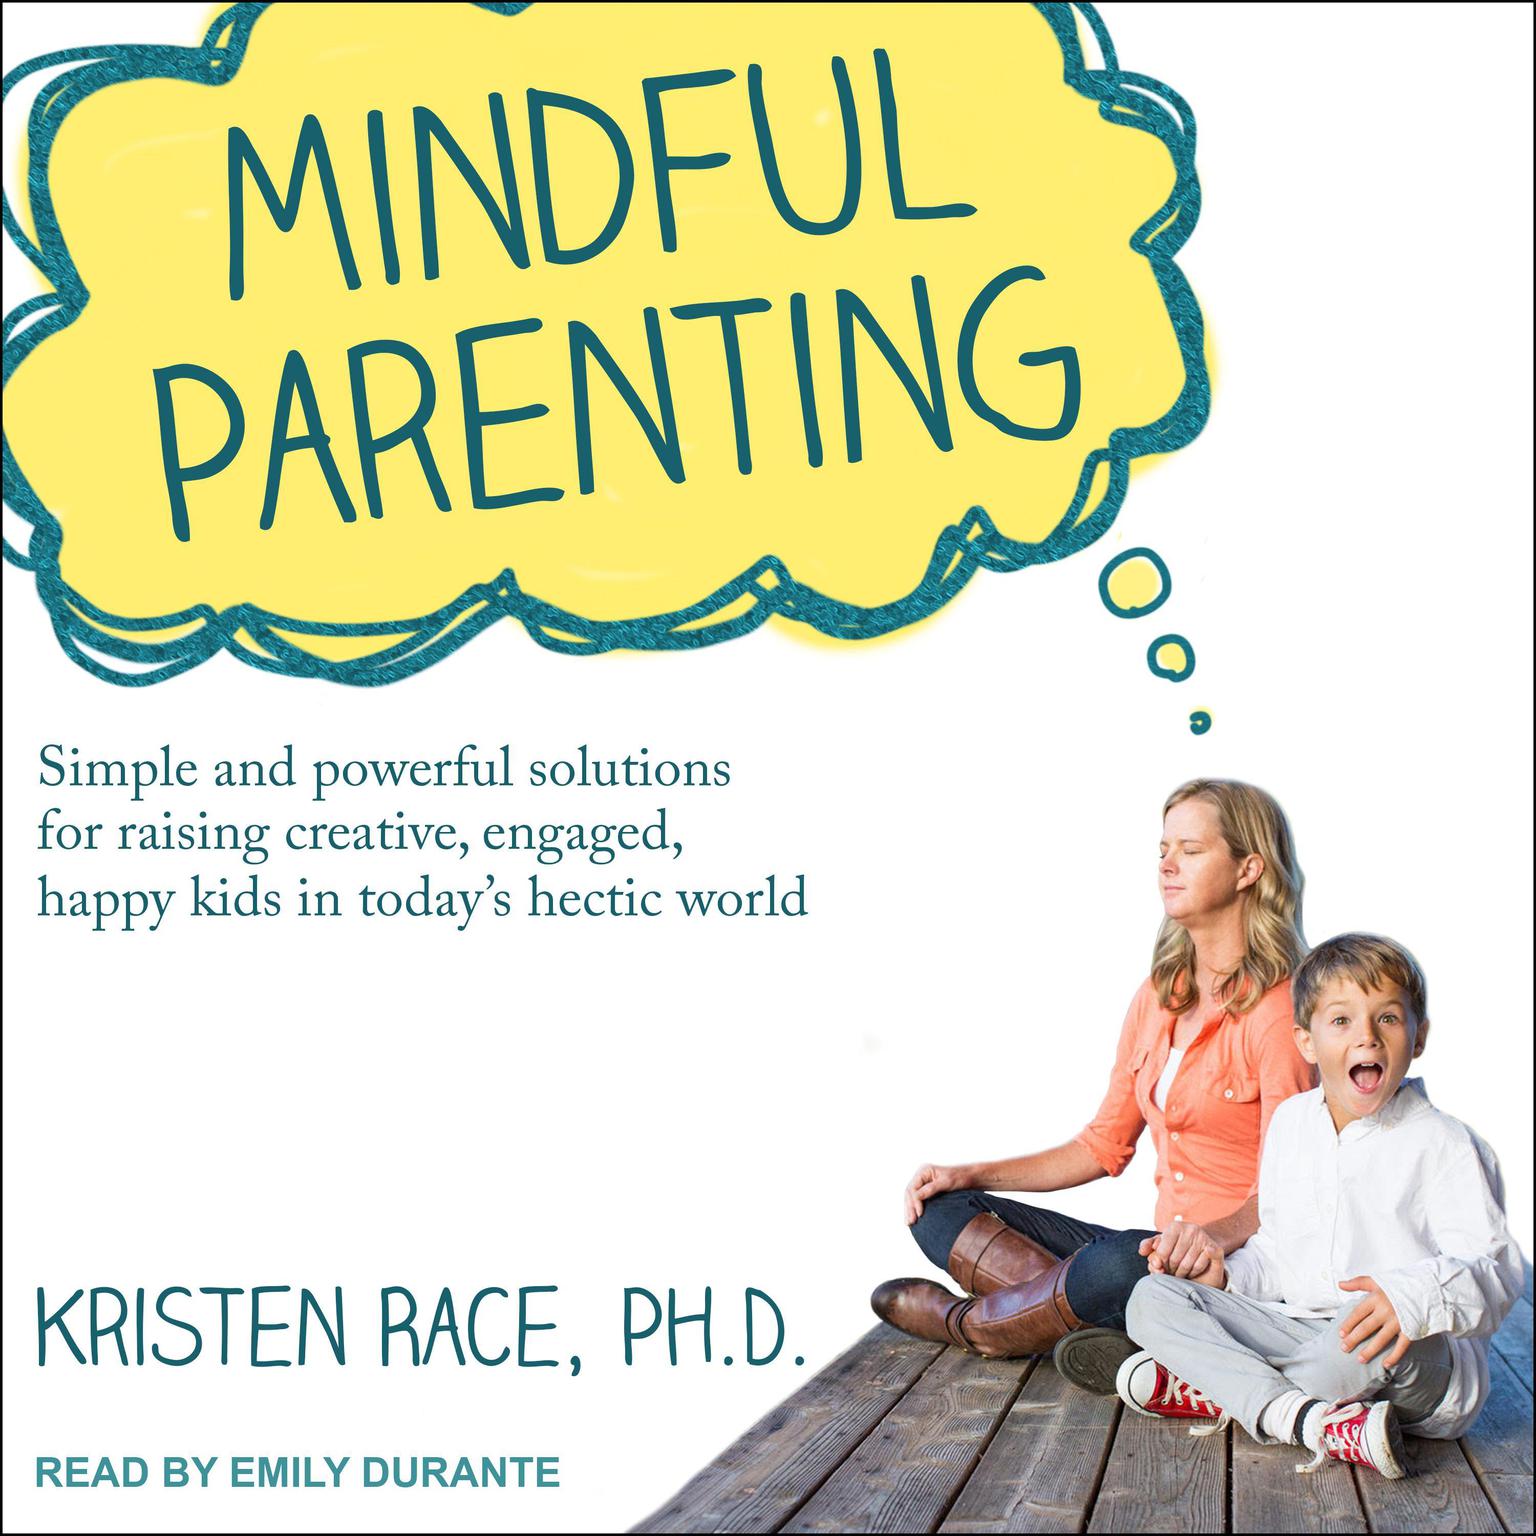 Mindful Parenting: Simple and Powerful Solutions for Raising Creative, Engaged, Happy Kids in Today’s Hectic World Audiobook, by Kristen Race